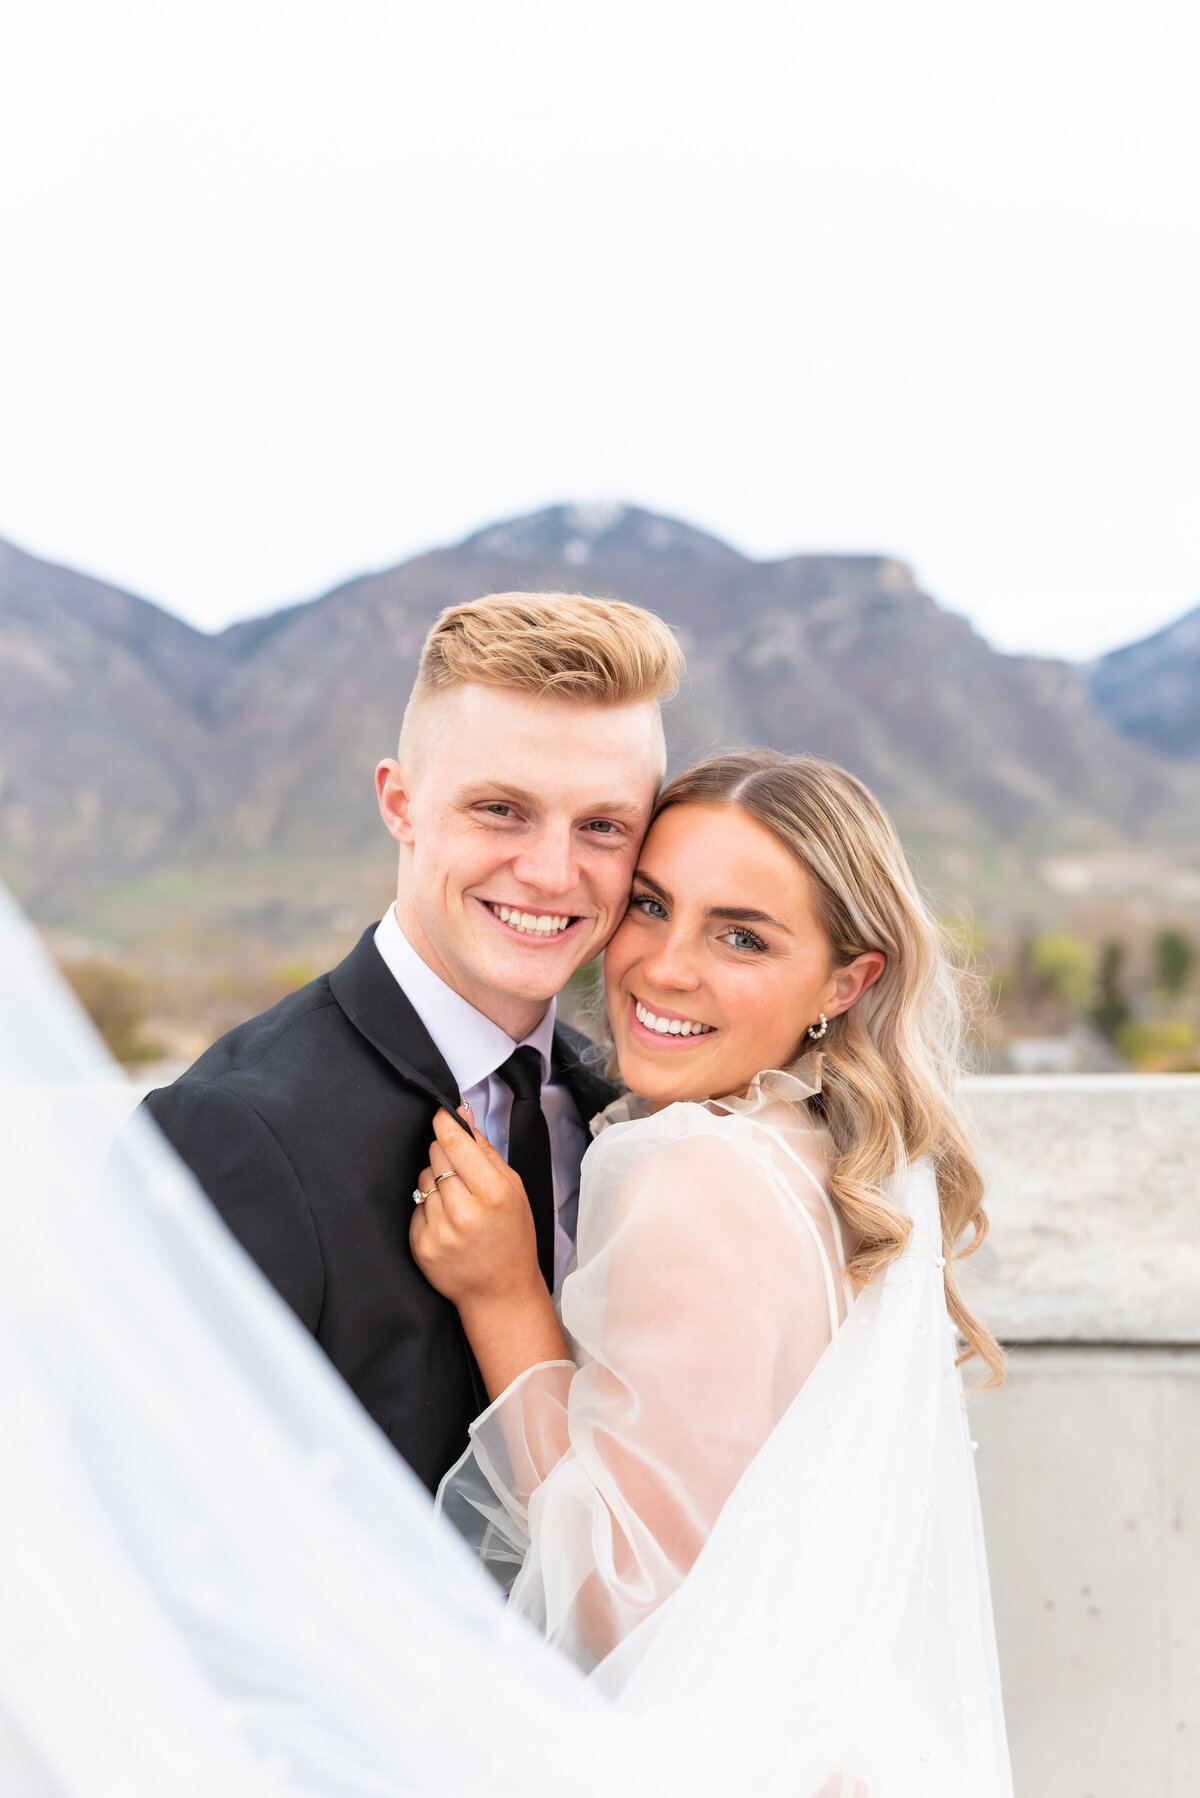 Bride and groom smiling together on their elopement day in Colorado